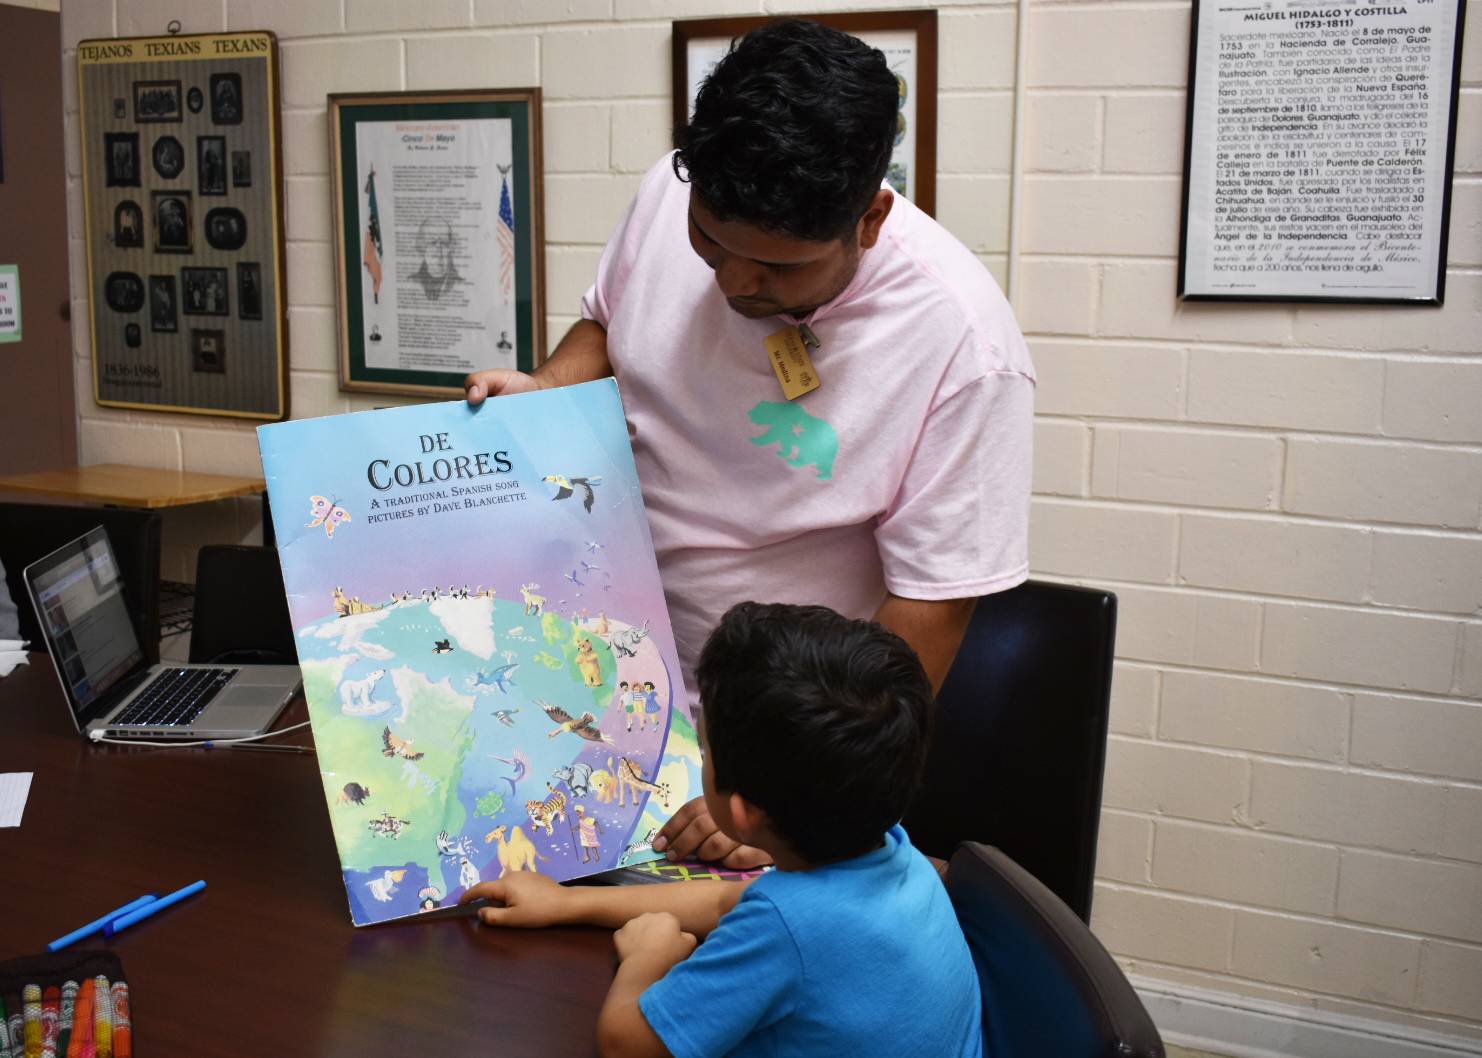 Bilingual/Bilcultural Education student Jacob Medina presents a book to one of the SMCISD students.